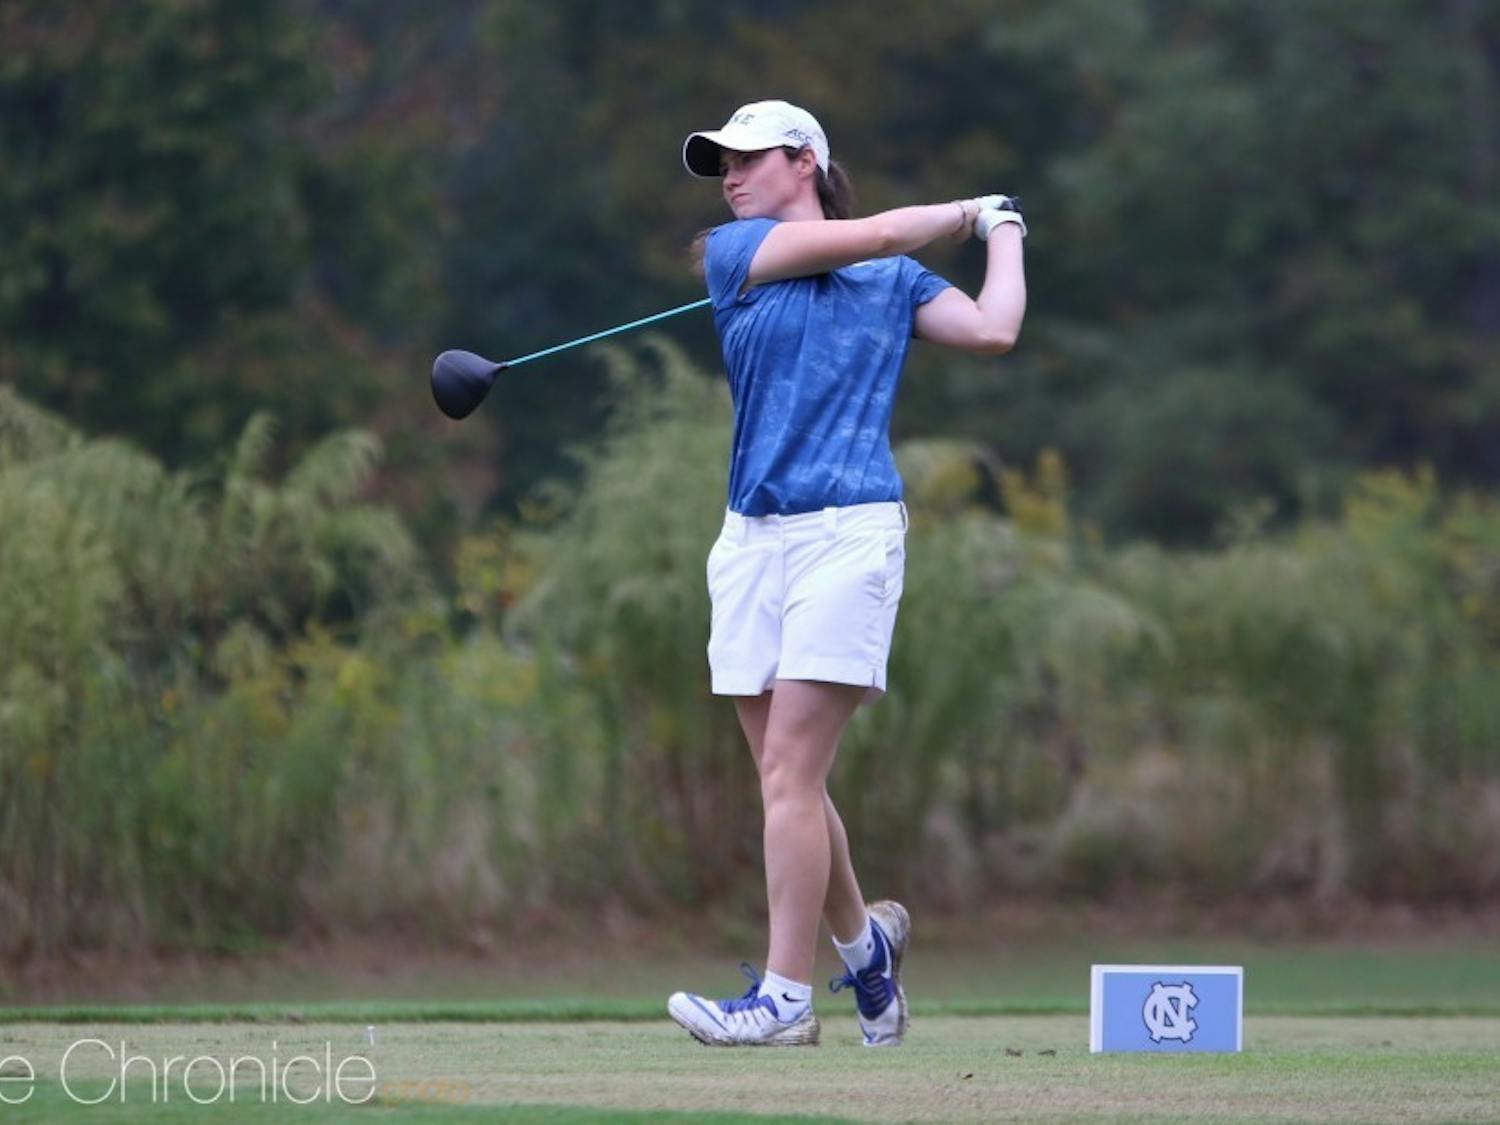 Leona Maguire will be playing for her second straight individual ACC championship this weekend.